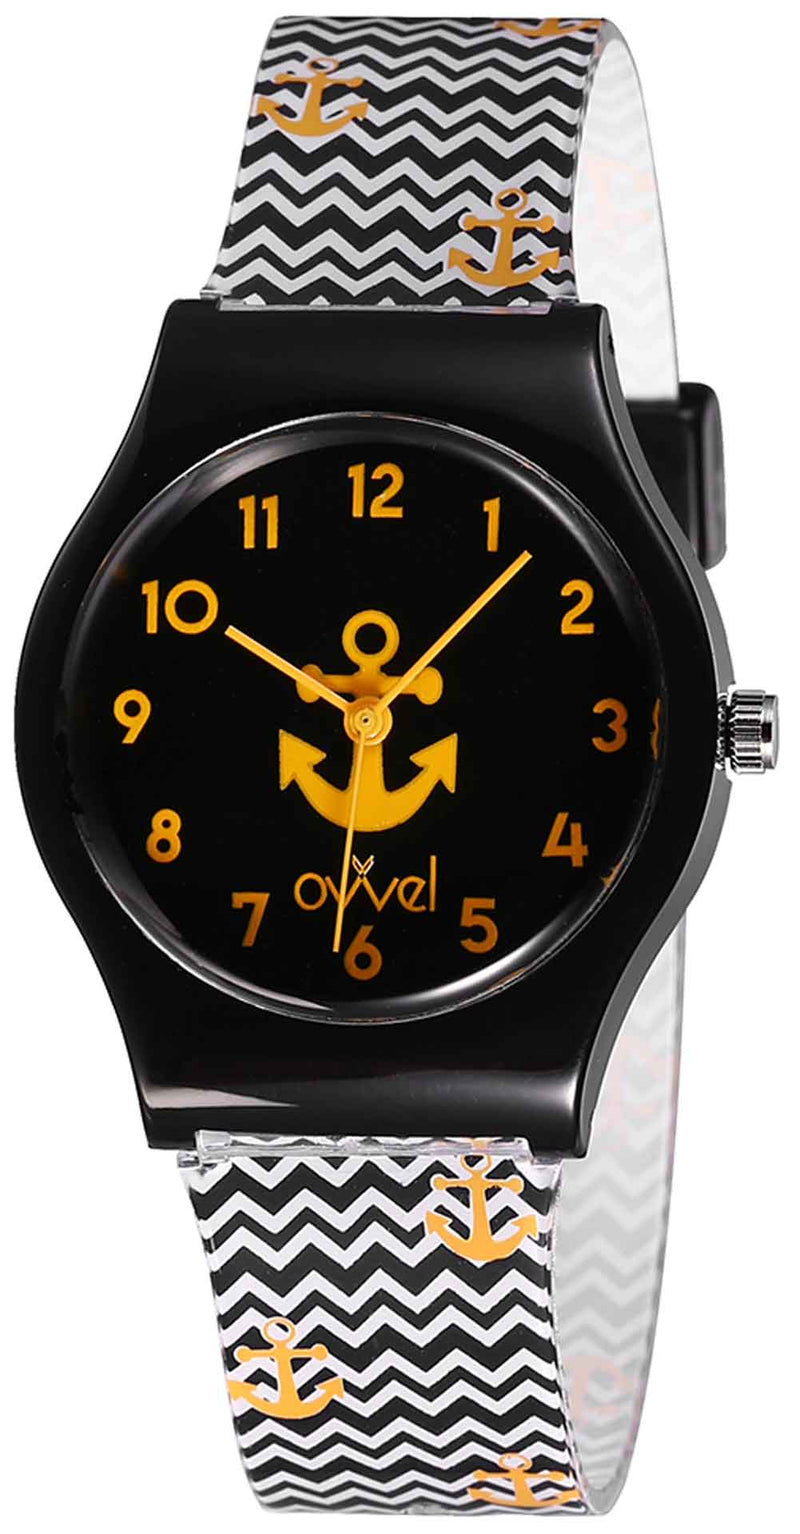 Watches for kids - Anchors